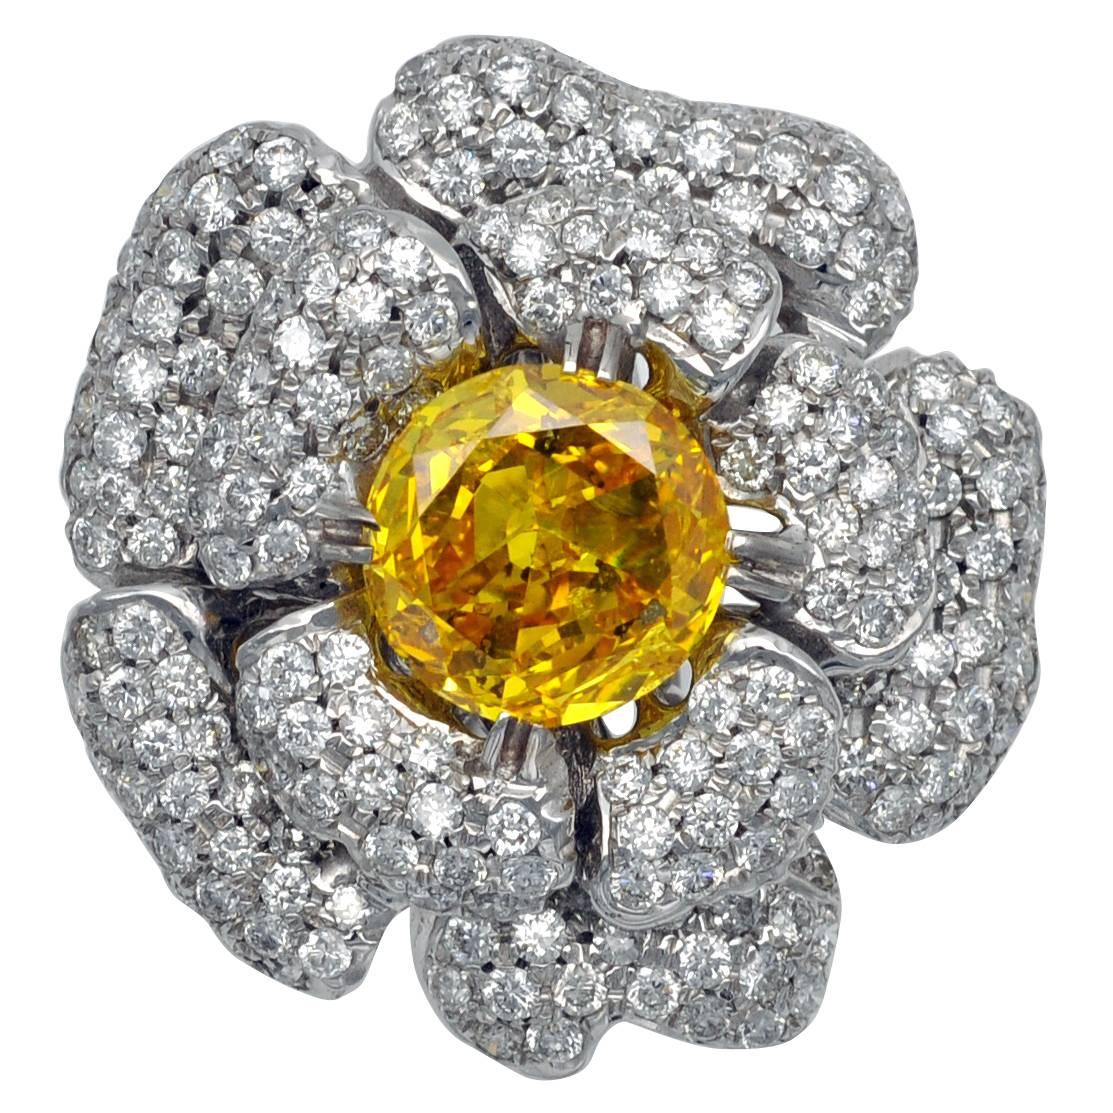 GIA Certified 3 Carat Fancy Vivid Orangy Yellow Zimmi Diamond Ring For Sale